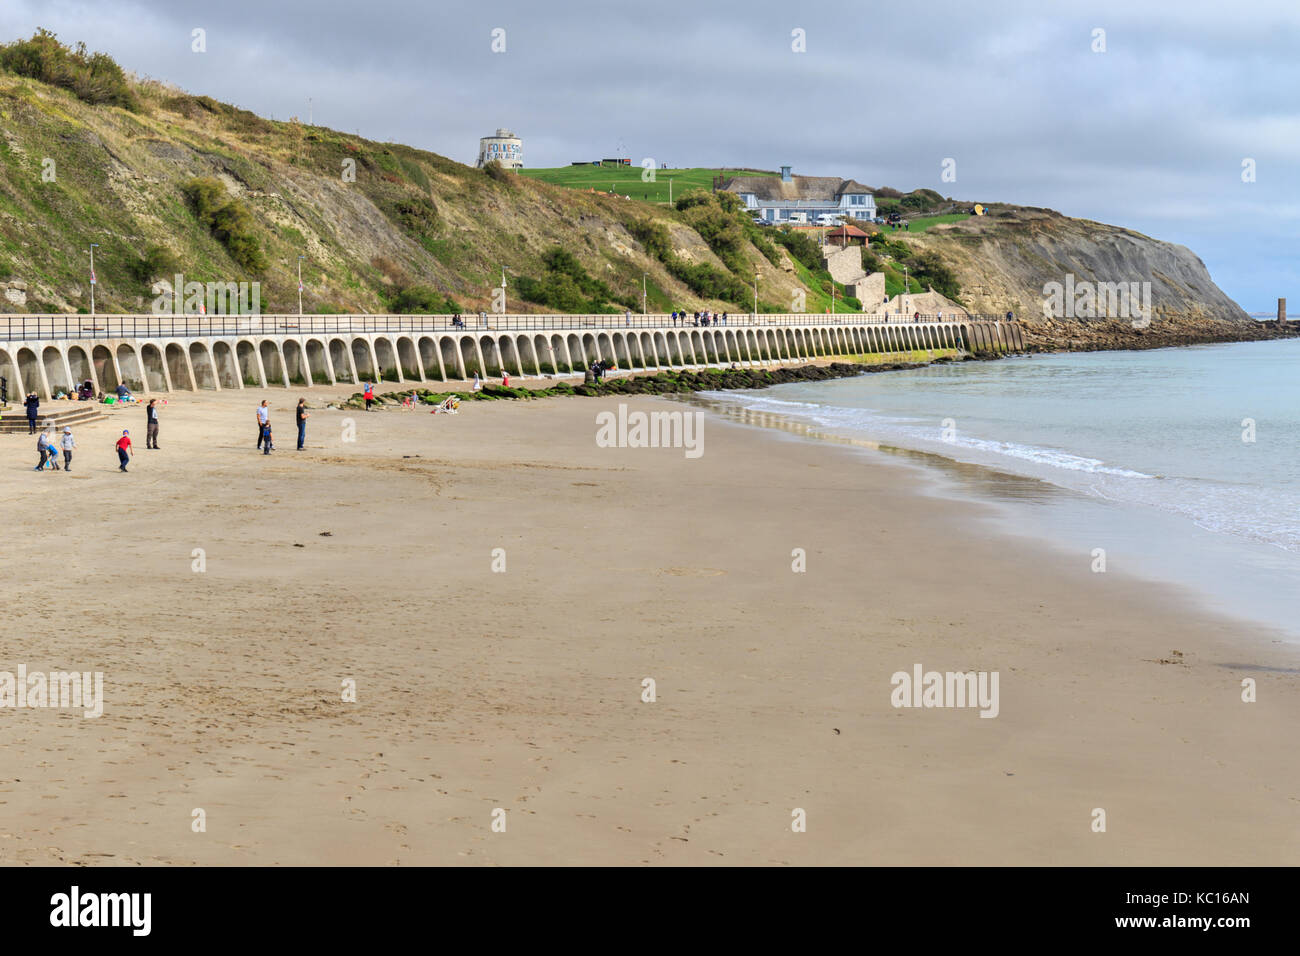 People on the beach, view of Folkestone Sunny Sands from the harbour arm. Kent England UK Stock Photo